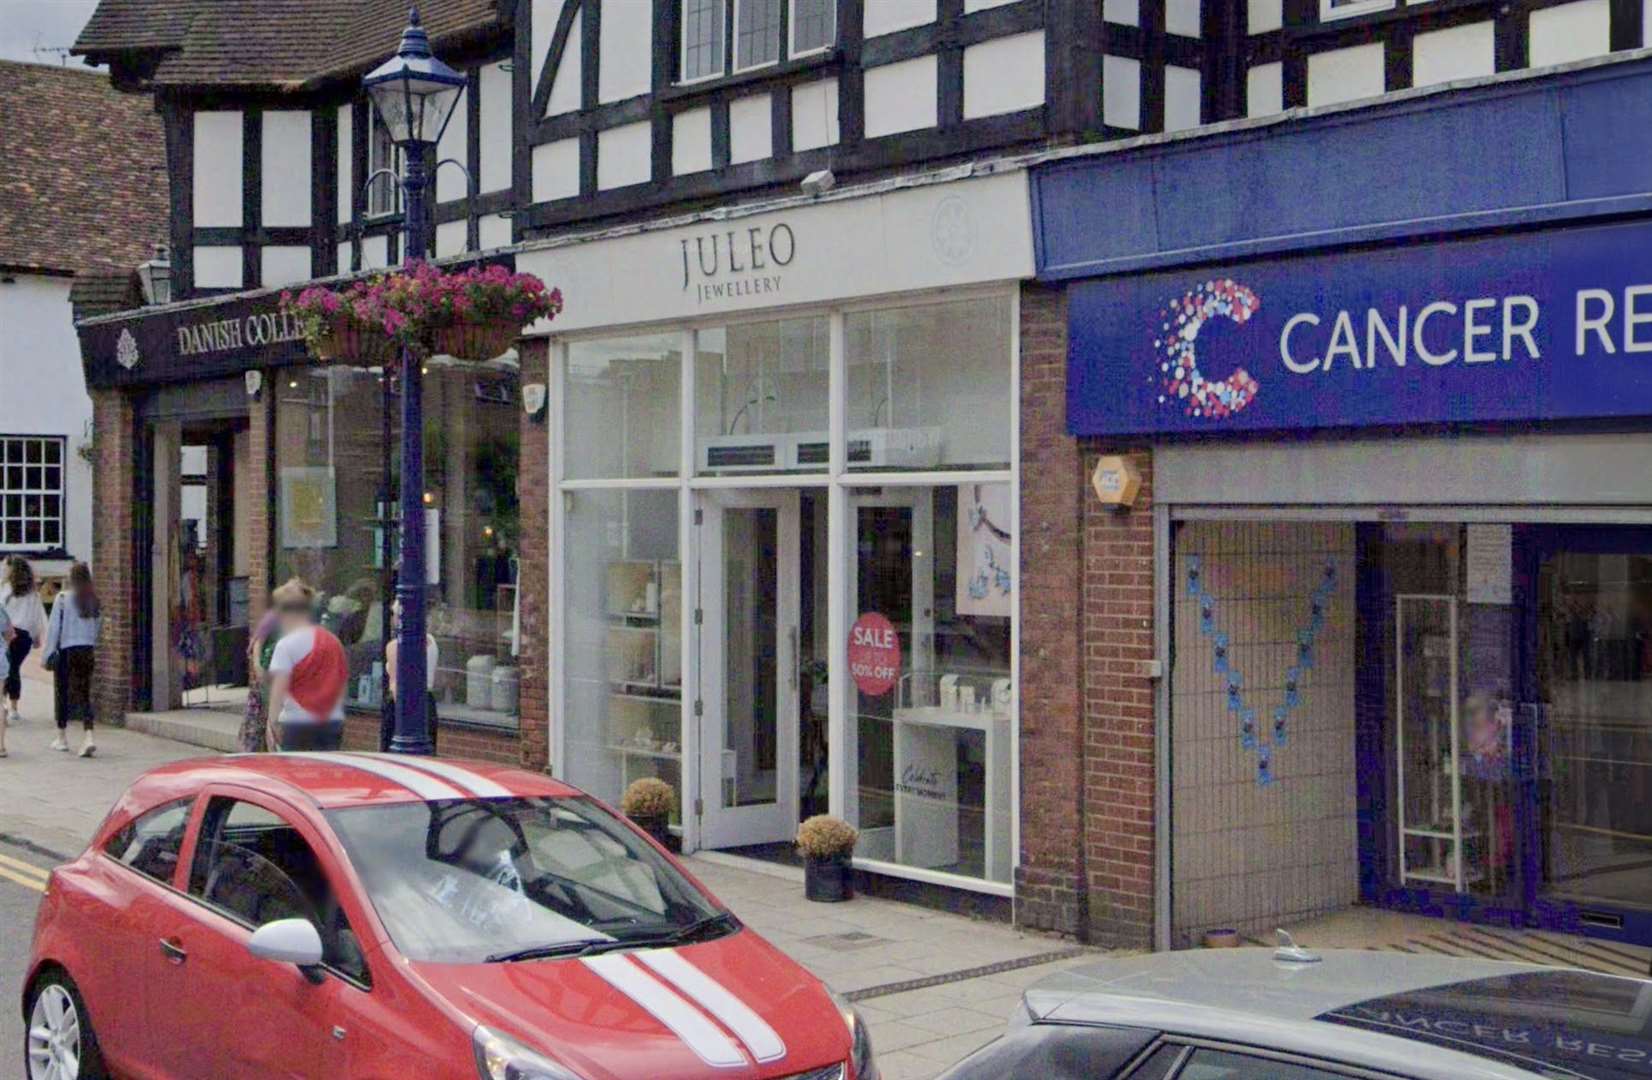 A £22,000 diamond necklace was reported stolen from Juleo Jewellery store at Bligh’s Meadow Shopping Centre in Sevenoaks. Picture: Google Maps